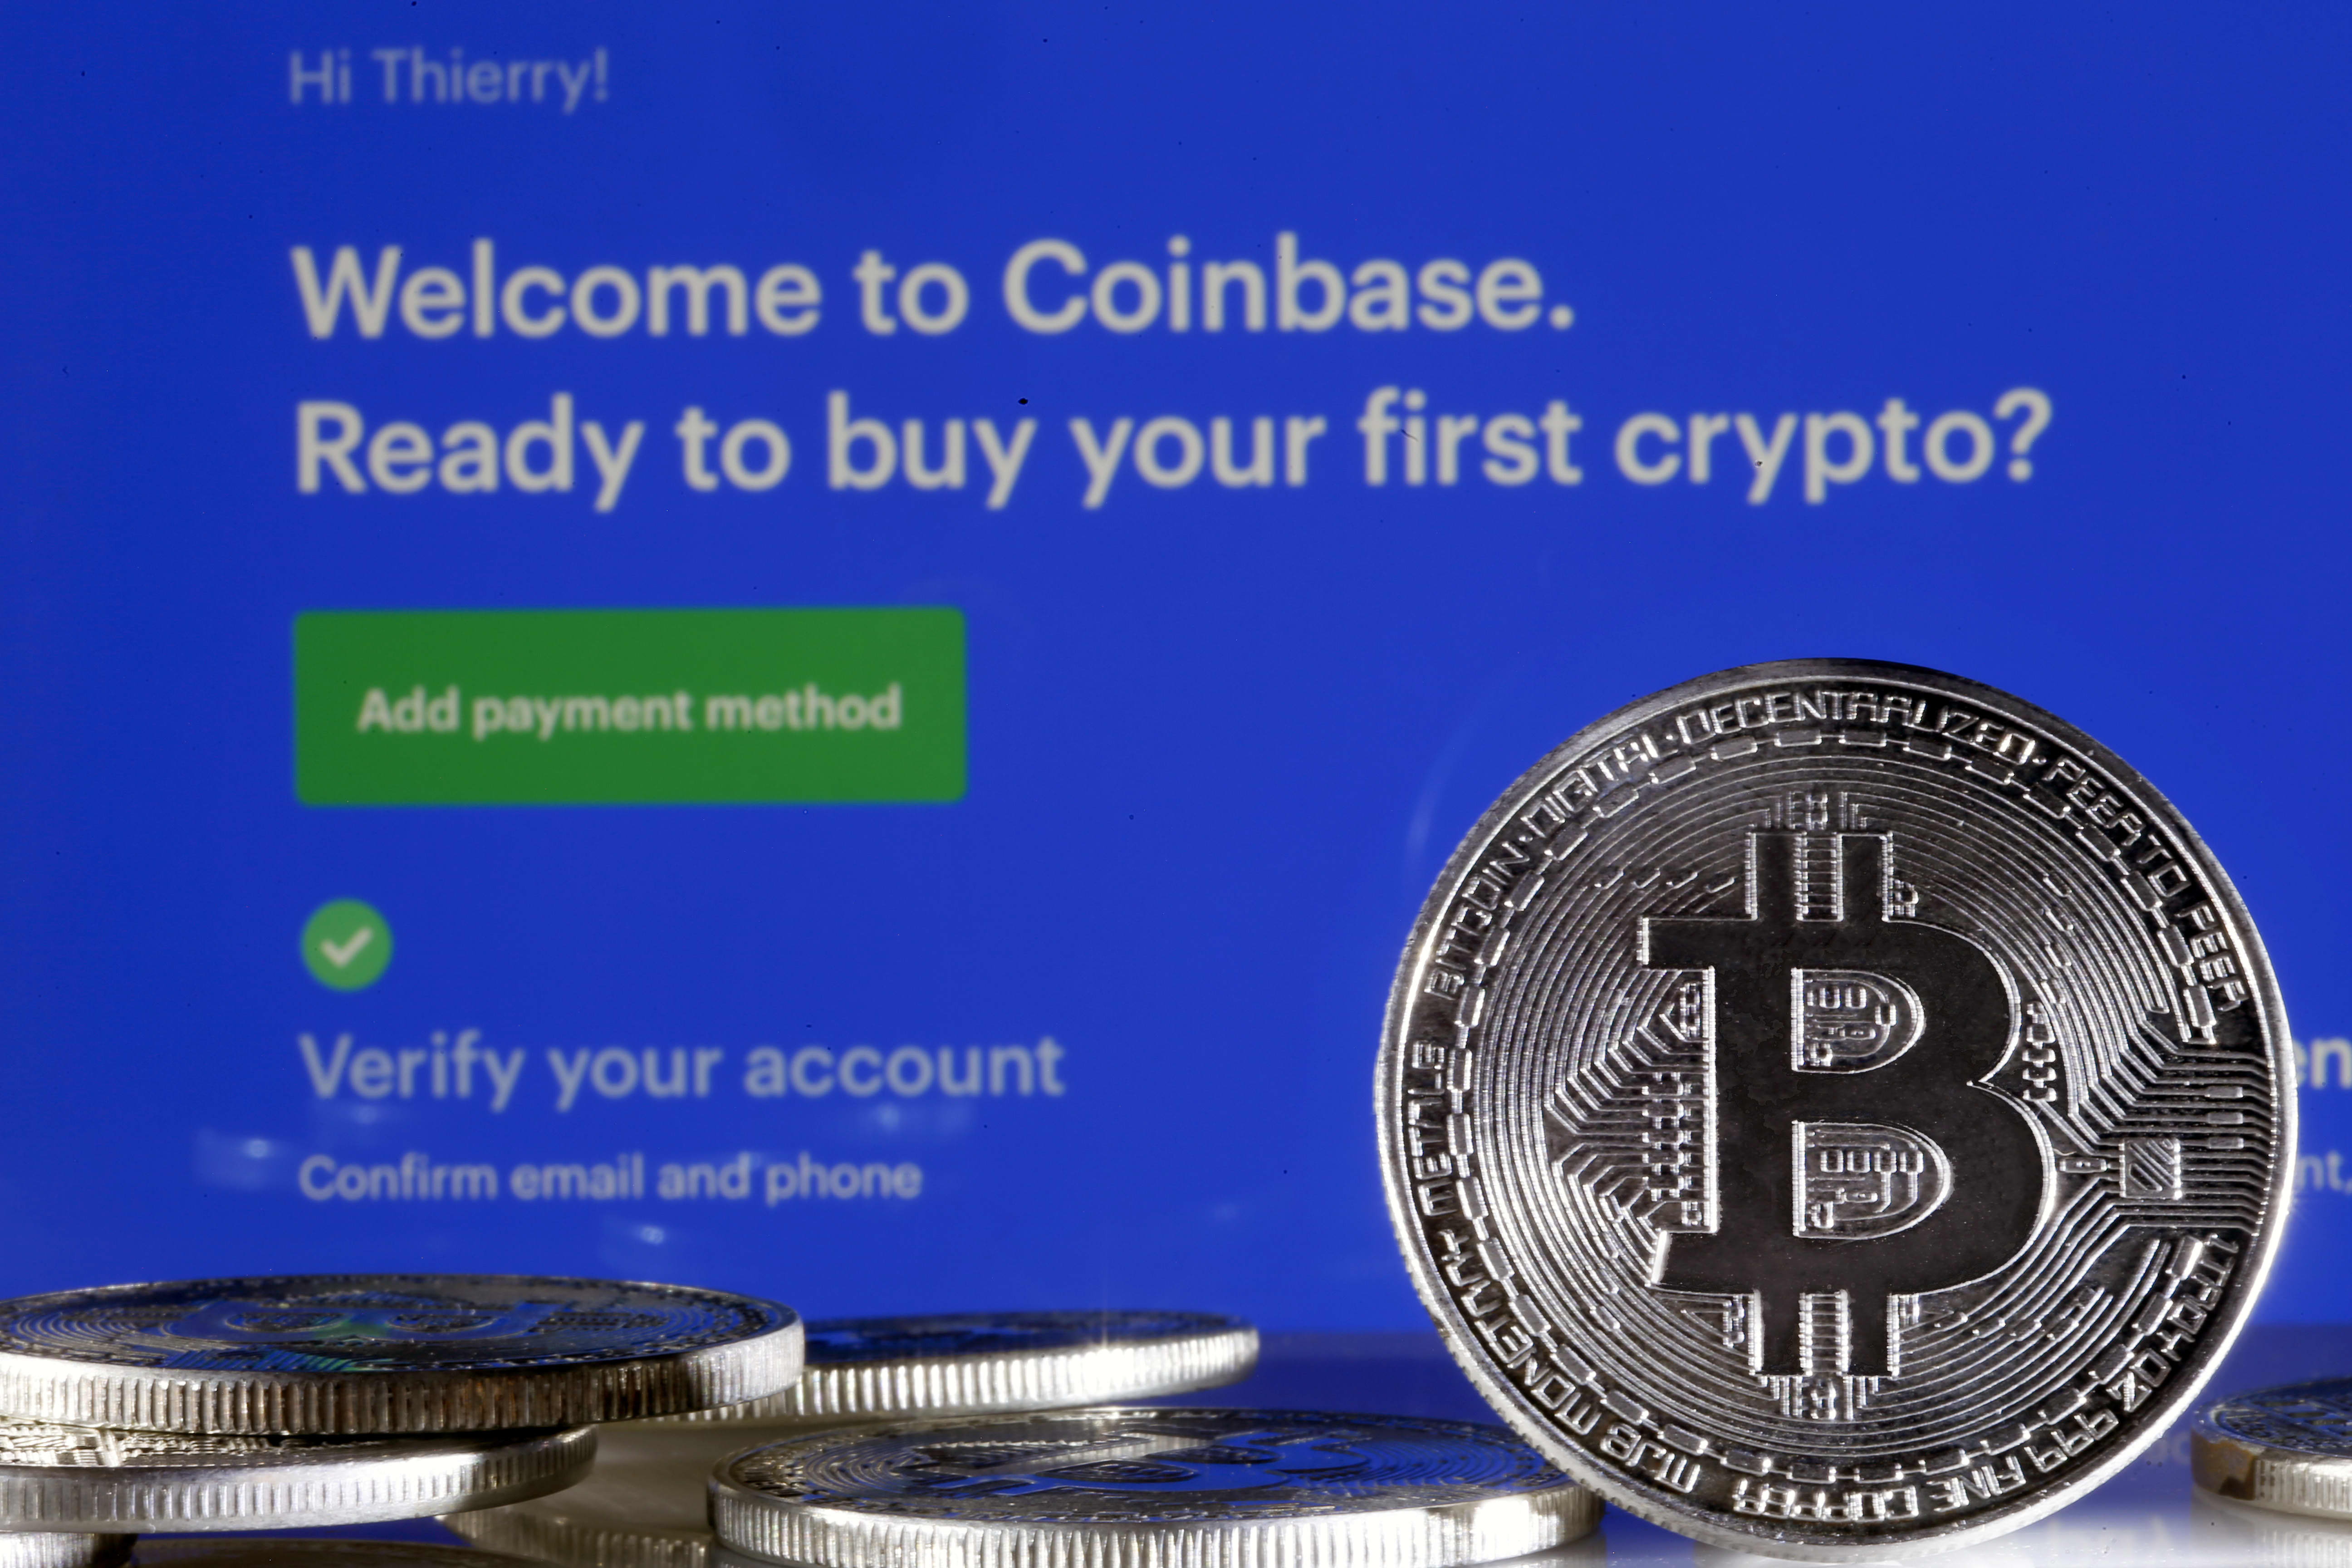 Coinbase’s debut is a “pool of water” for crypto – but there are risks ahead